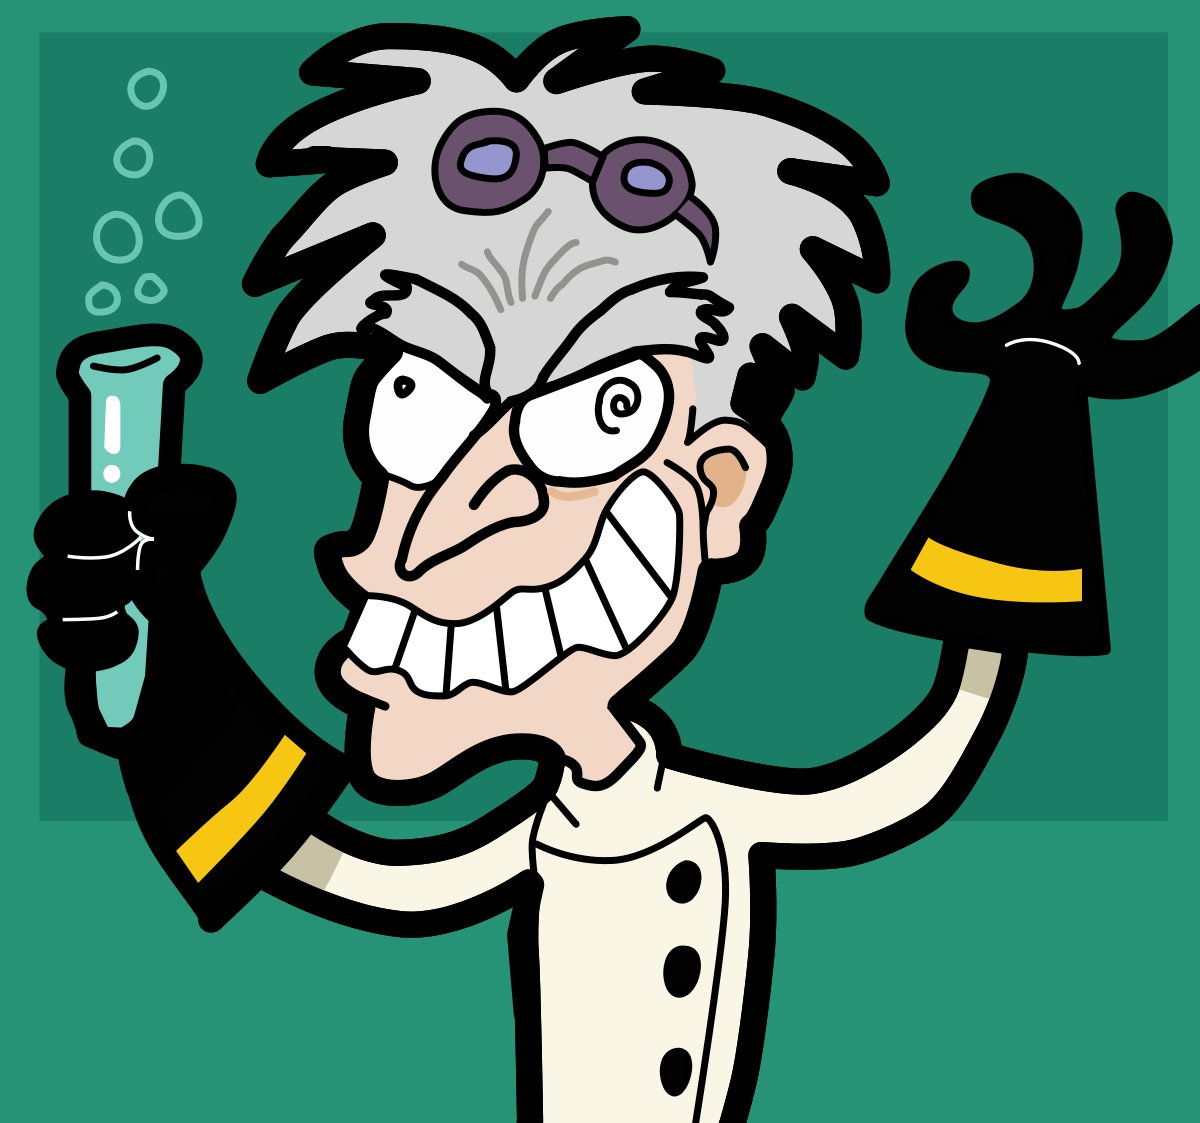 Title 1 STEAM Night is just around the corner! There will be MAD scientists wandering around the halls...mixing solutions, evaporating liquids, and making hypotheses! Don't miss this family event! October 14th 5:30-7:30